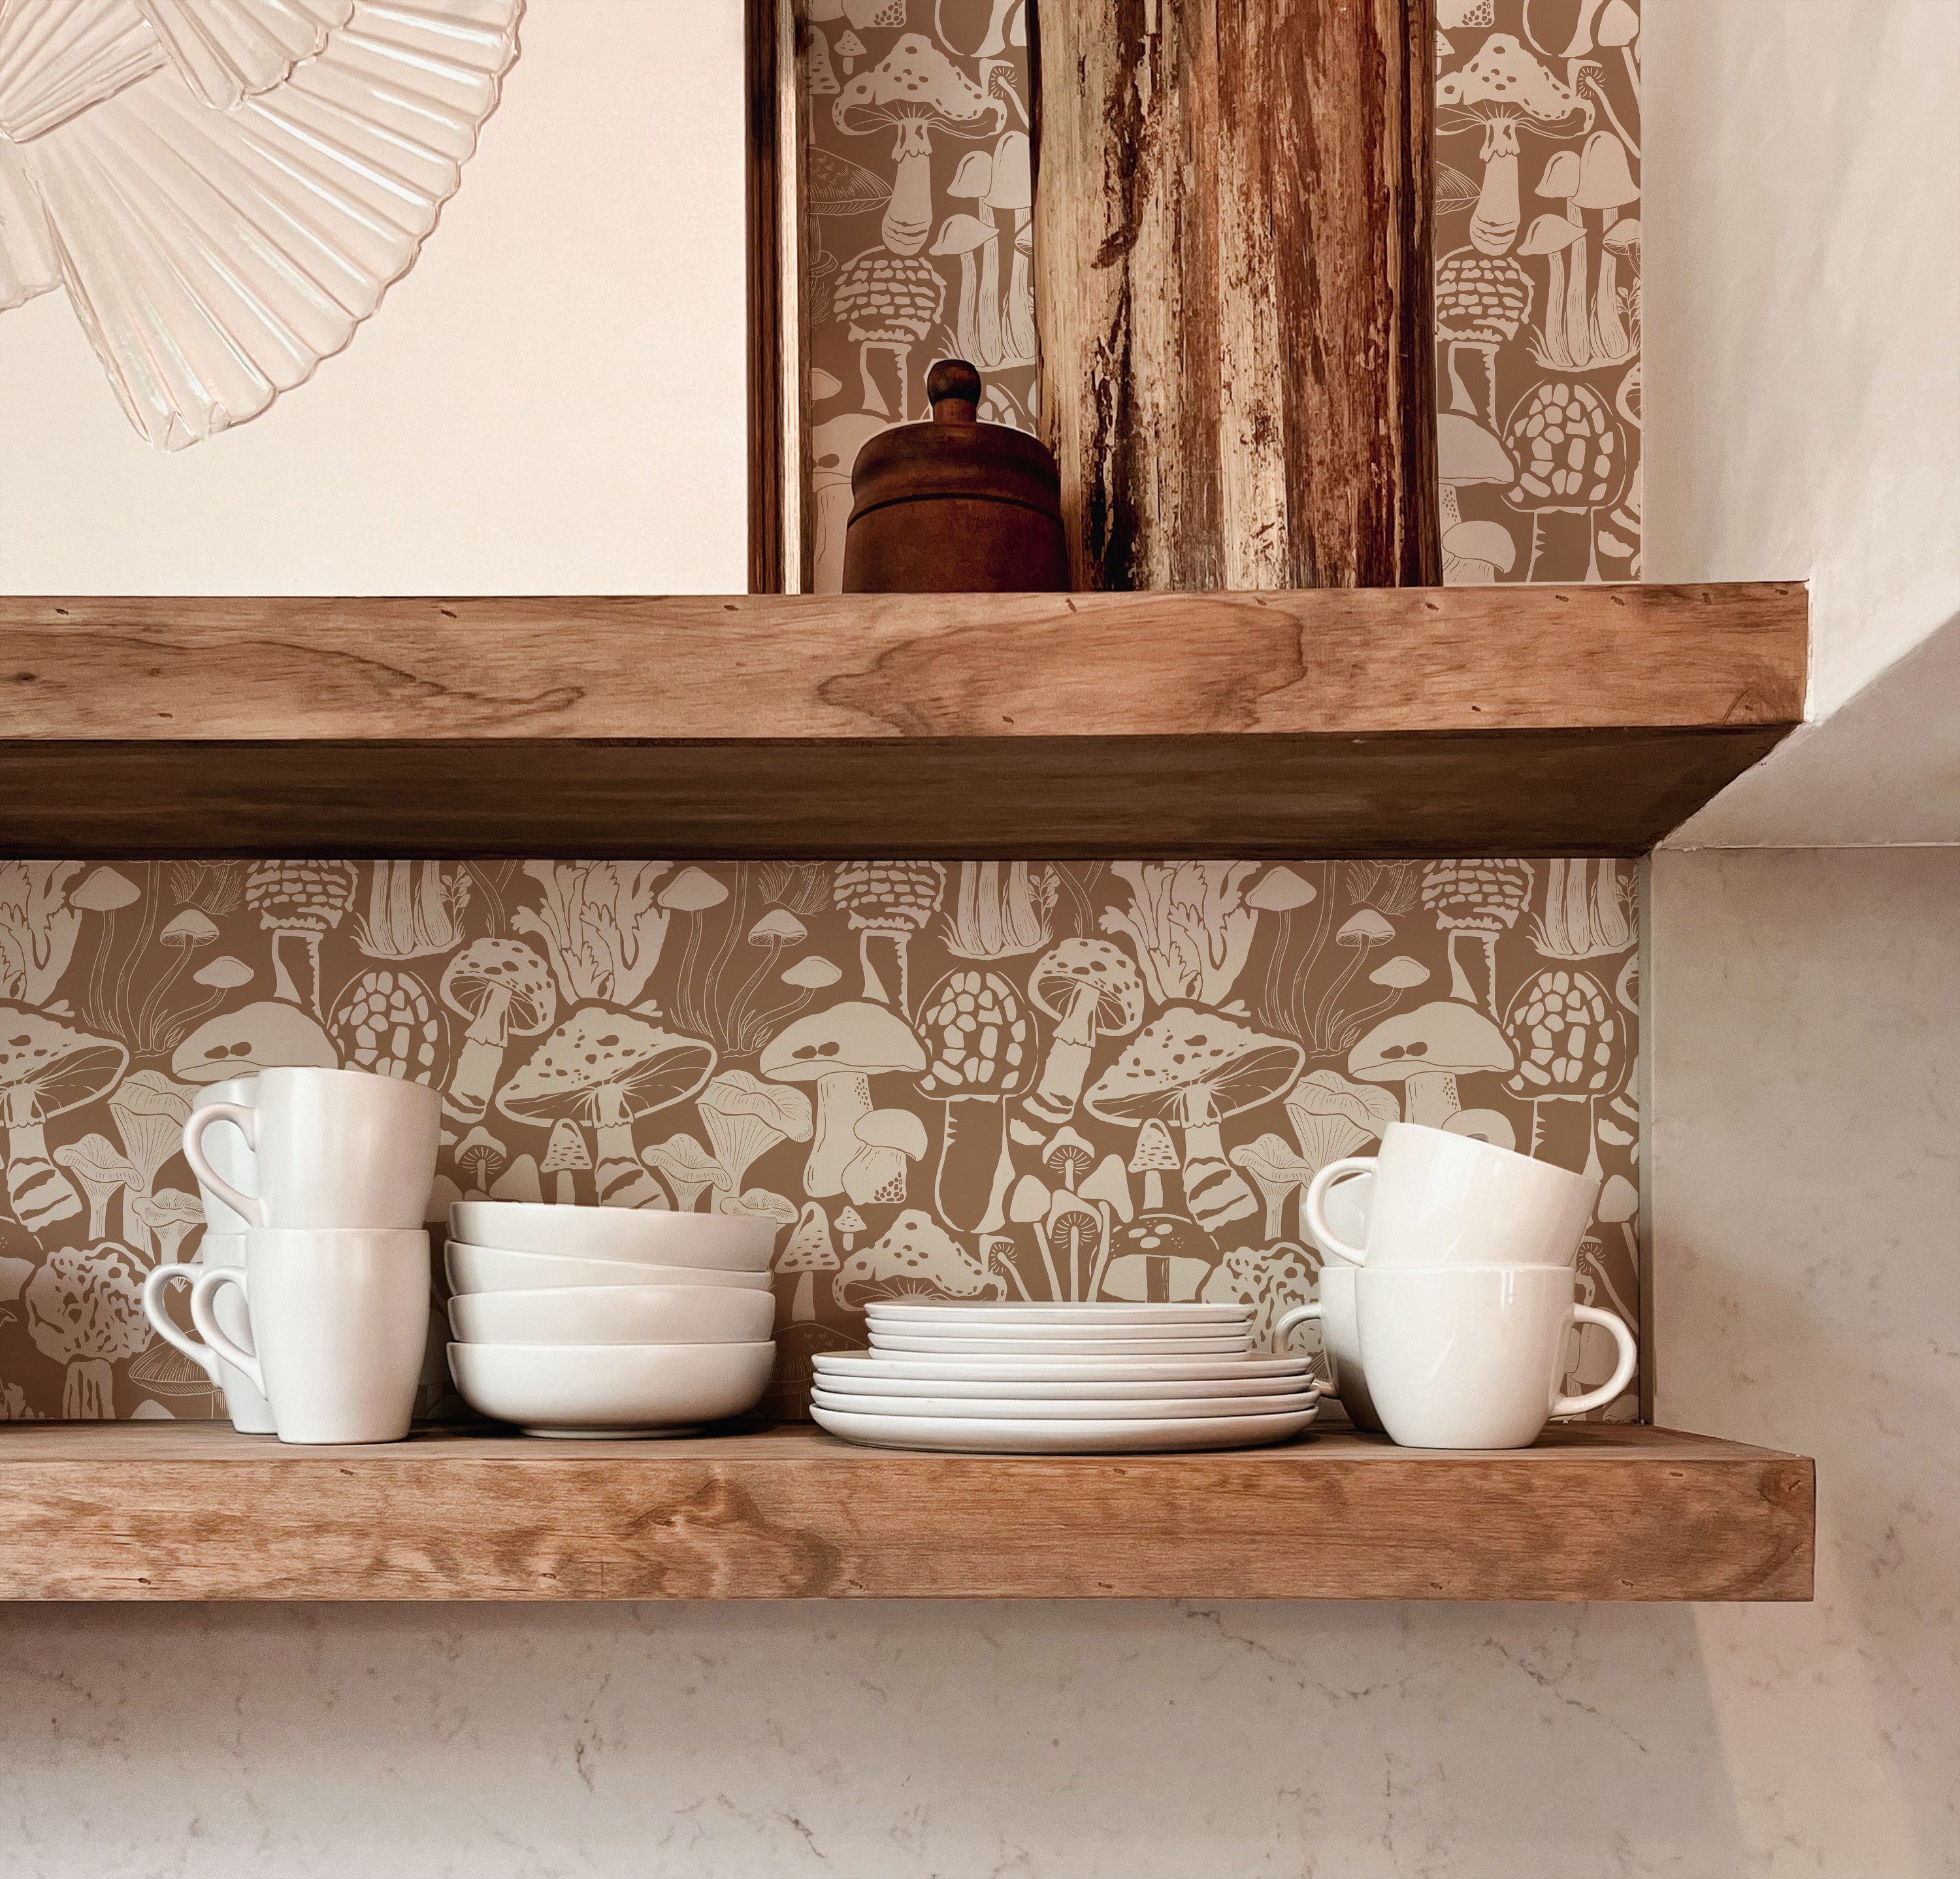 A rustic kitchen shelf scene set against a charming mushroom-patterned wallpaper in brown, showcasing an assortment of white cups and dishes, invoking an earthy and homey ambiance.